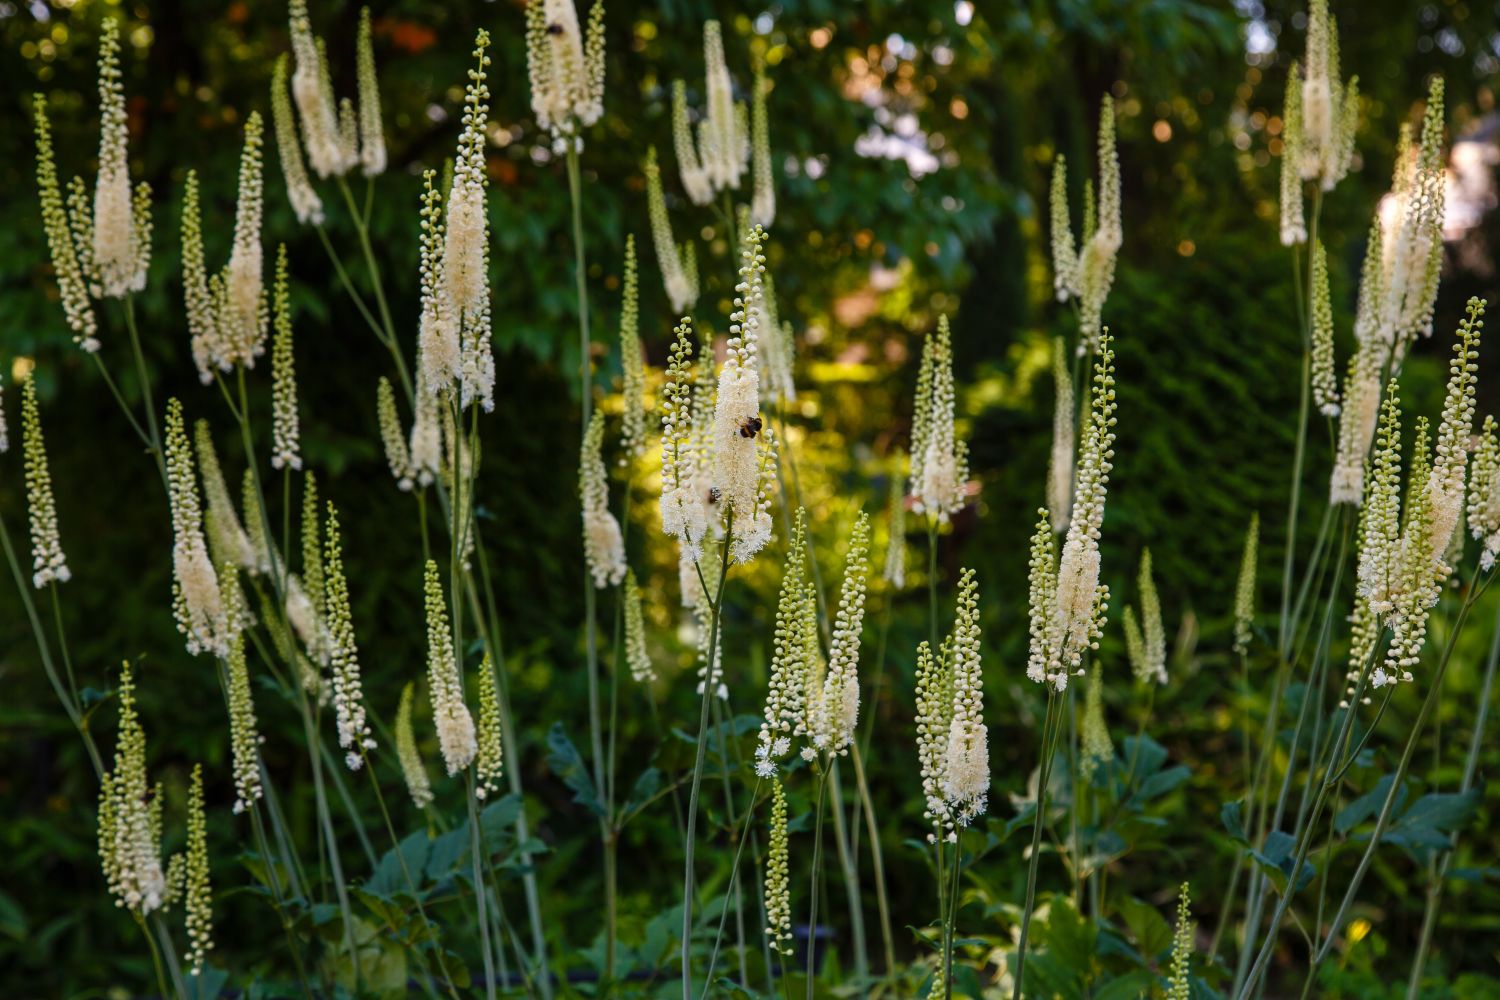 black cohosh extract: plant grown in wild